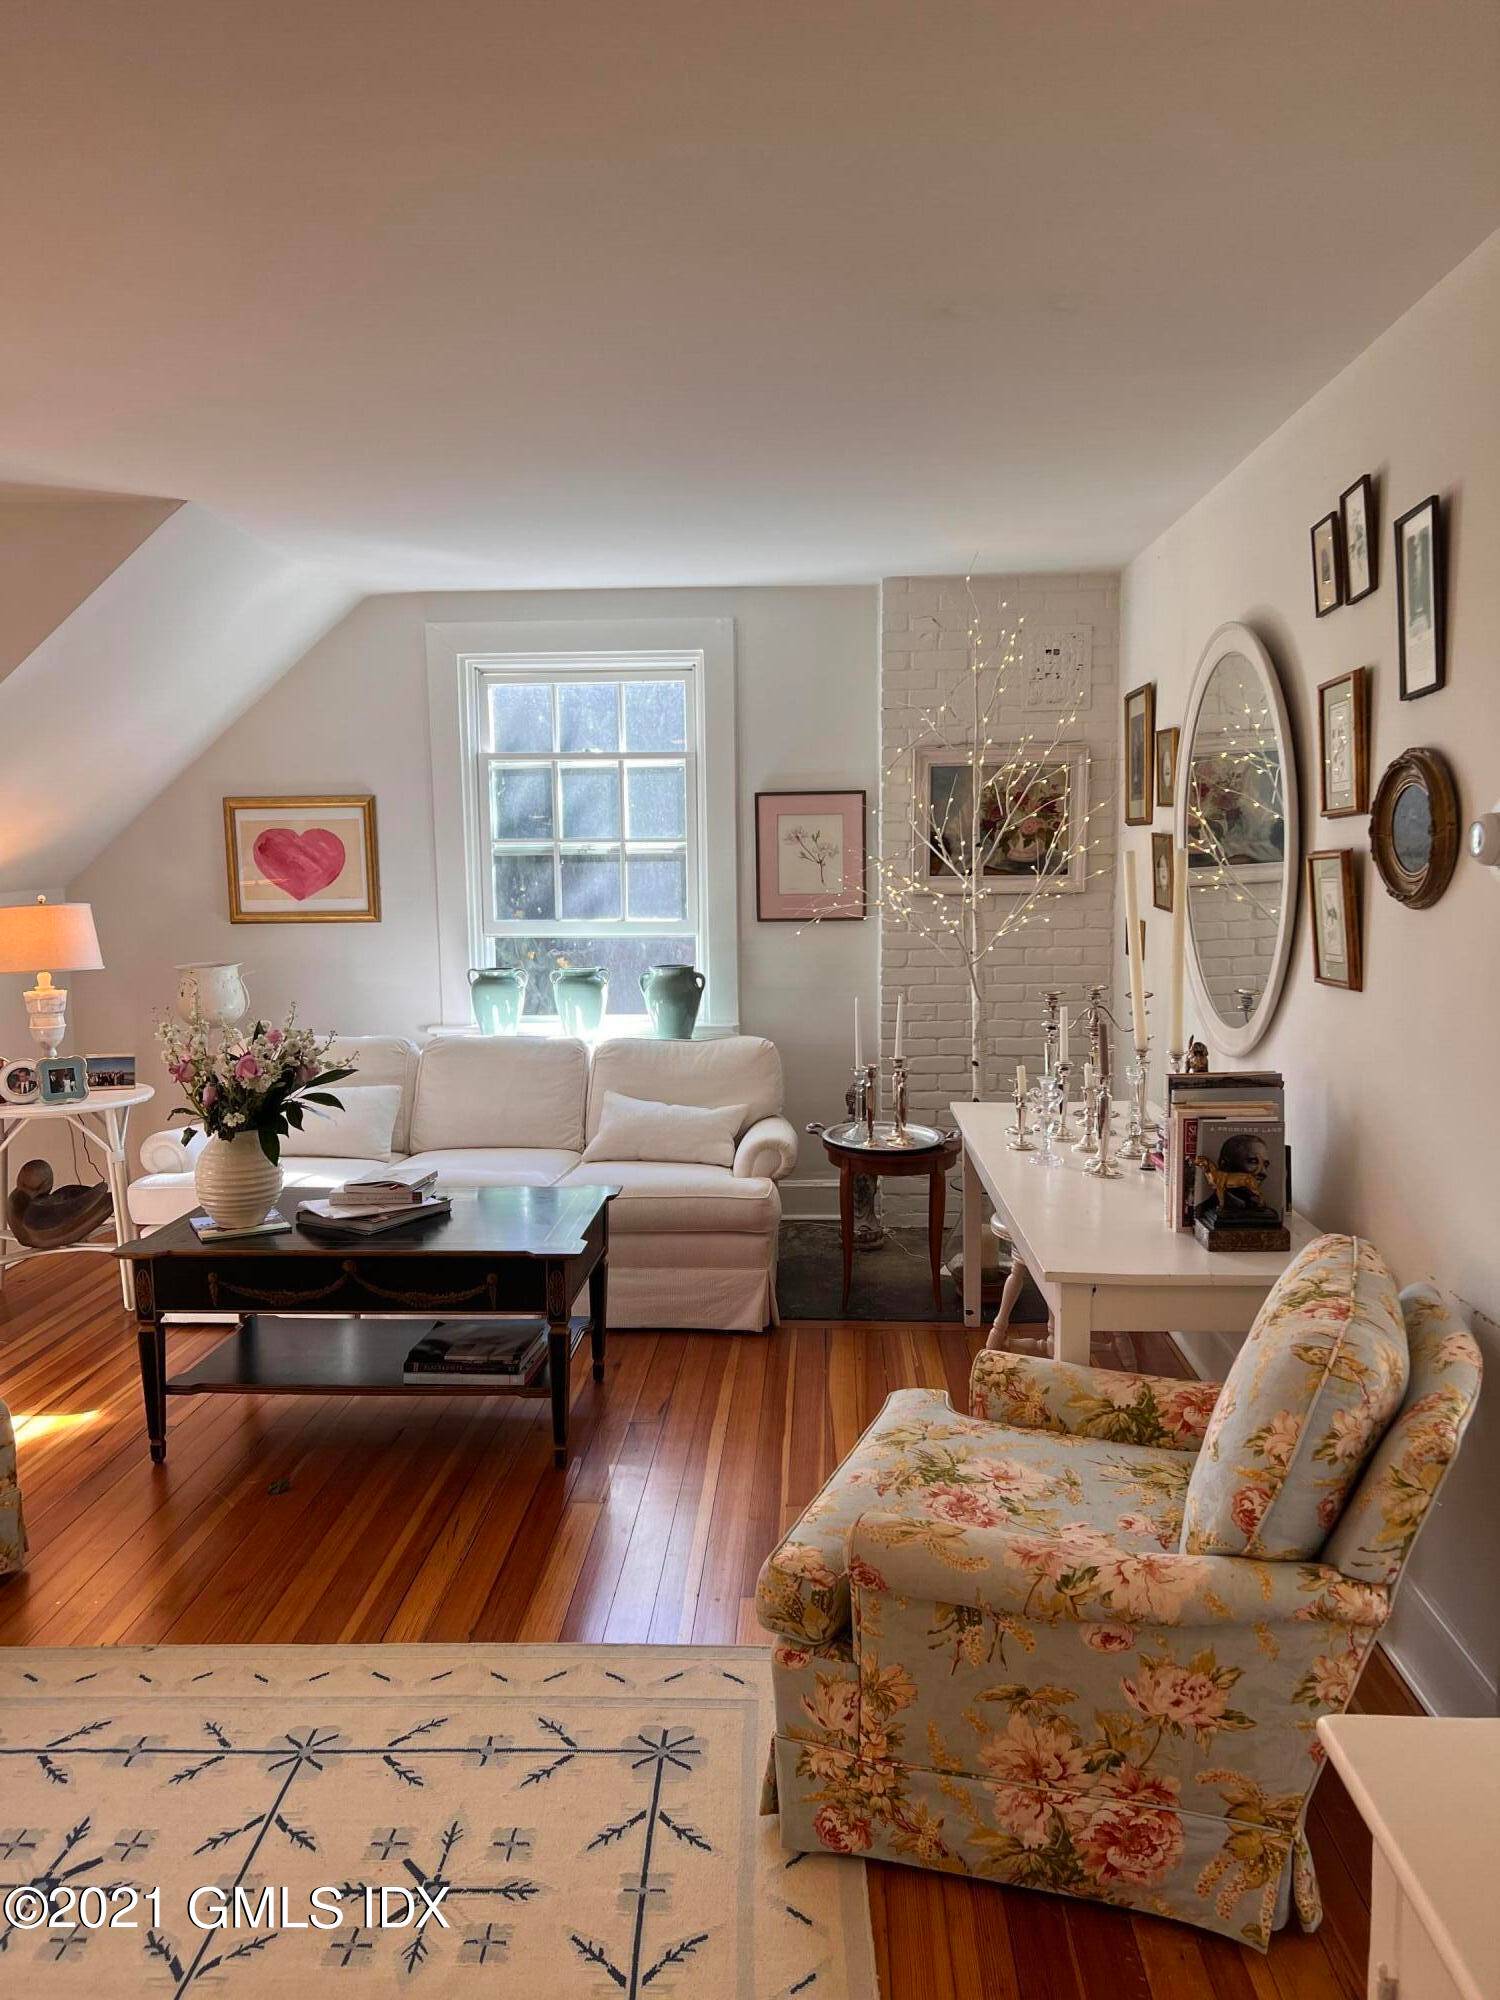 Charming, renovated, sunny, private 2BR 1B Carriage House apt in Rock Ridge estate area, close town, train, Greenwich Avenue dining and all amenities.